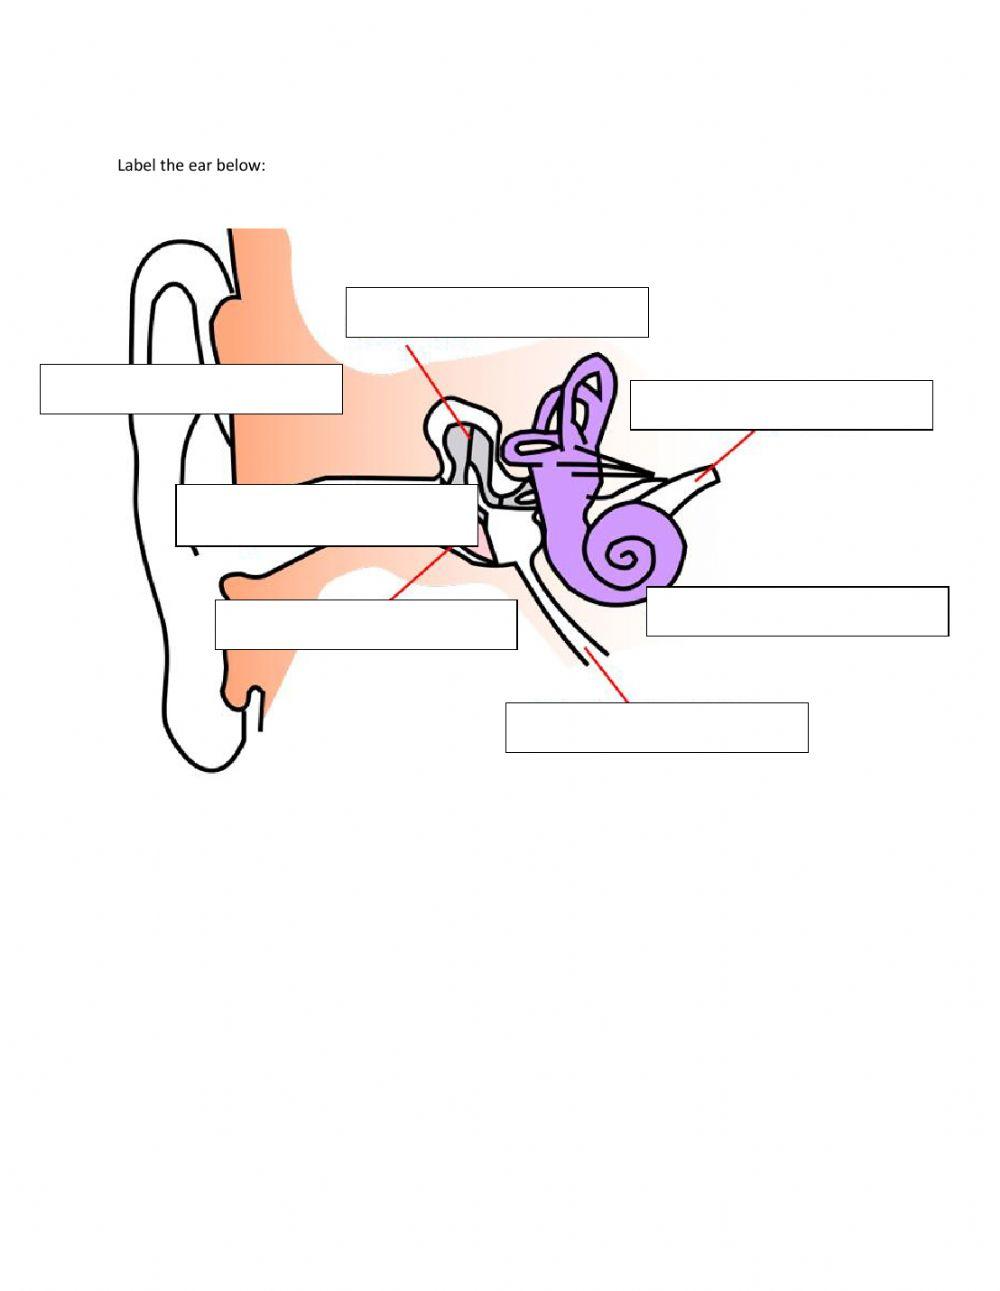 Parts of the ear